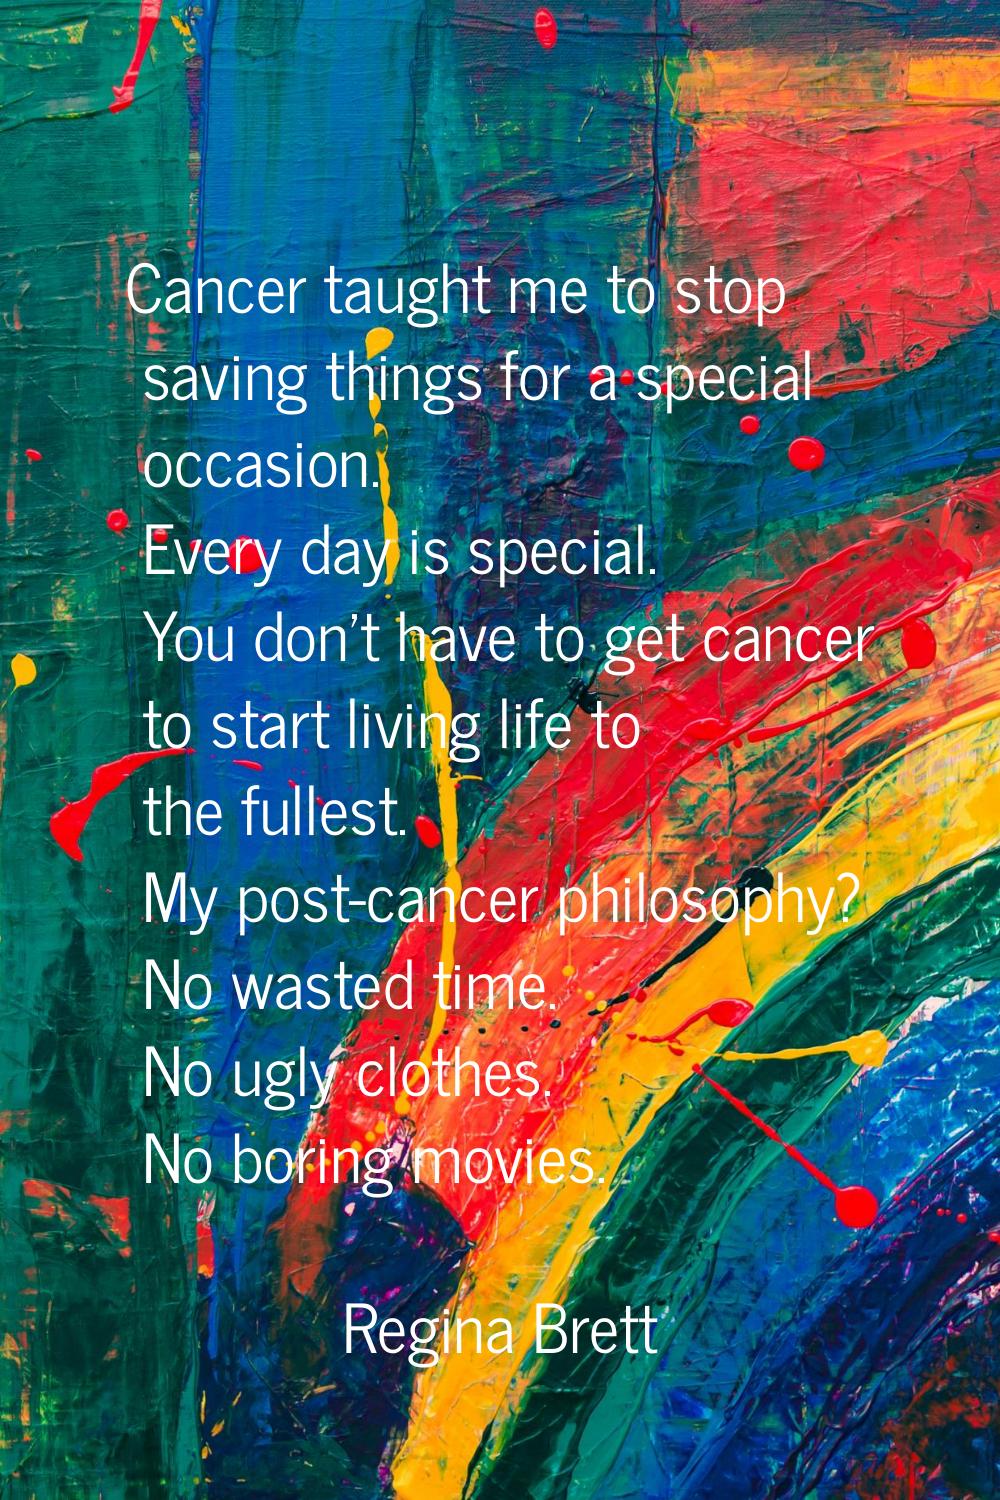 Cancer taught me to stop saving things for a special occasion. Every day is special. You don't have